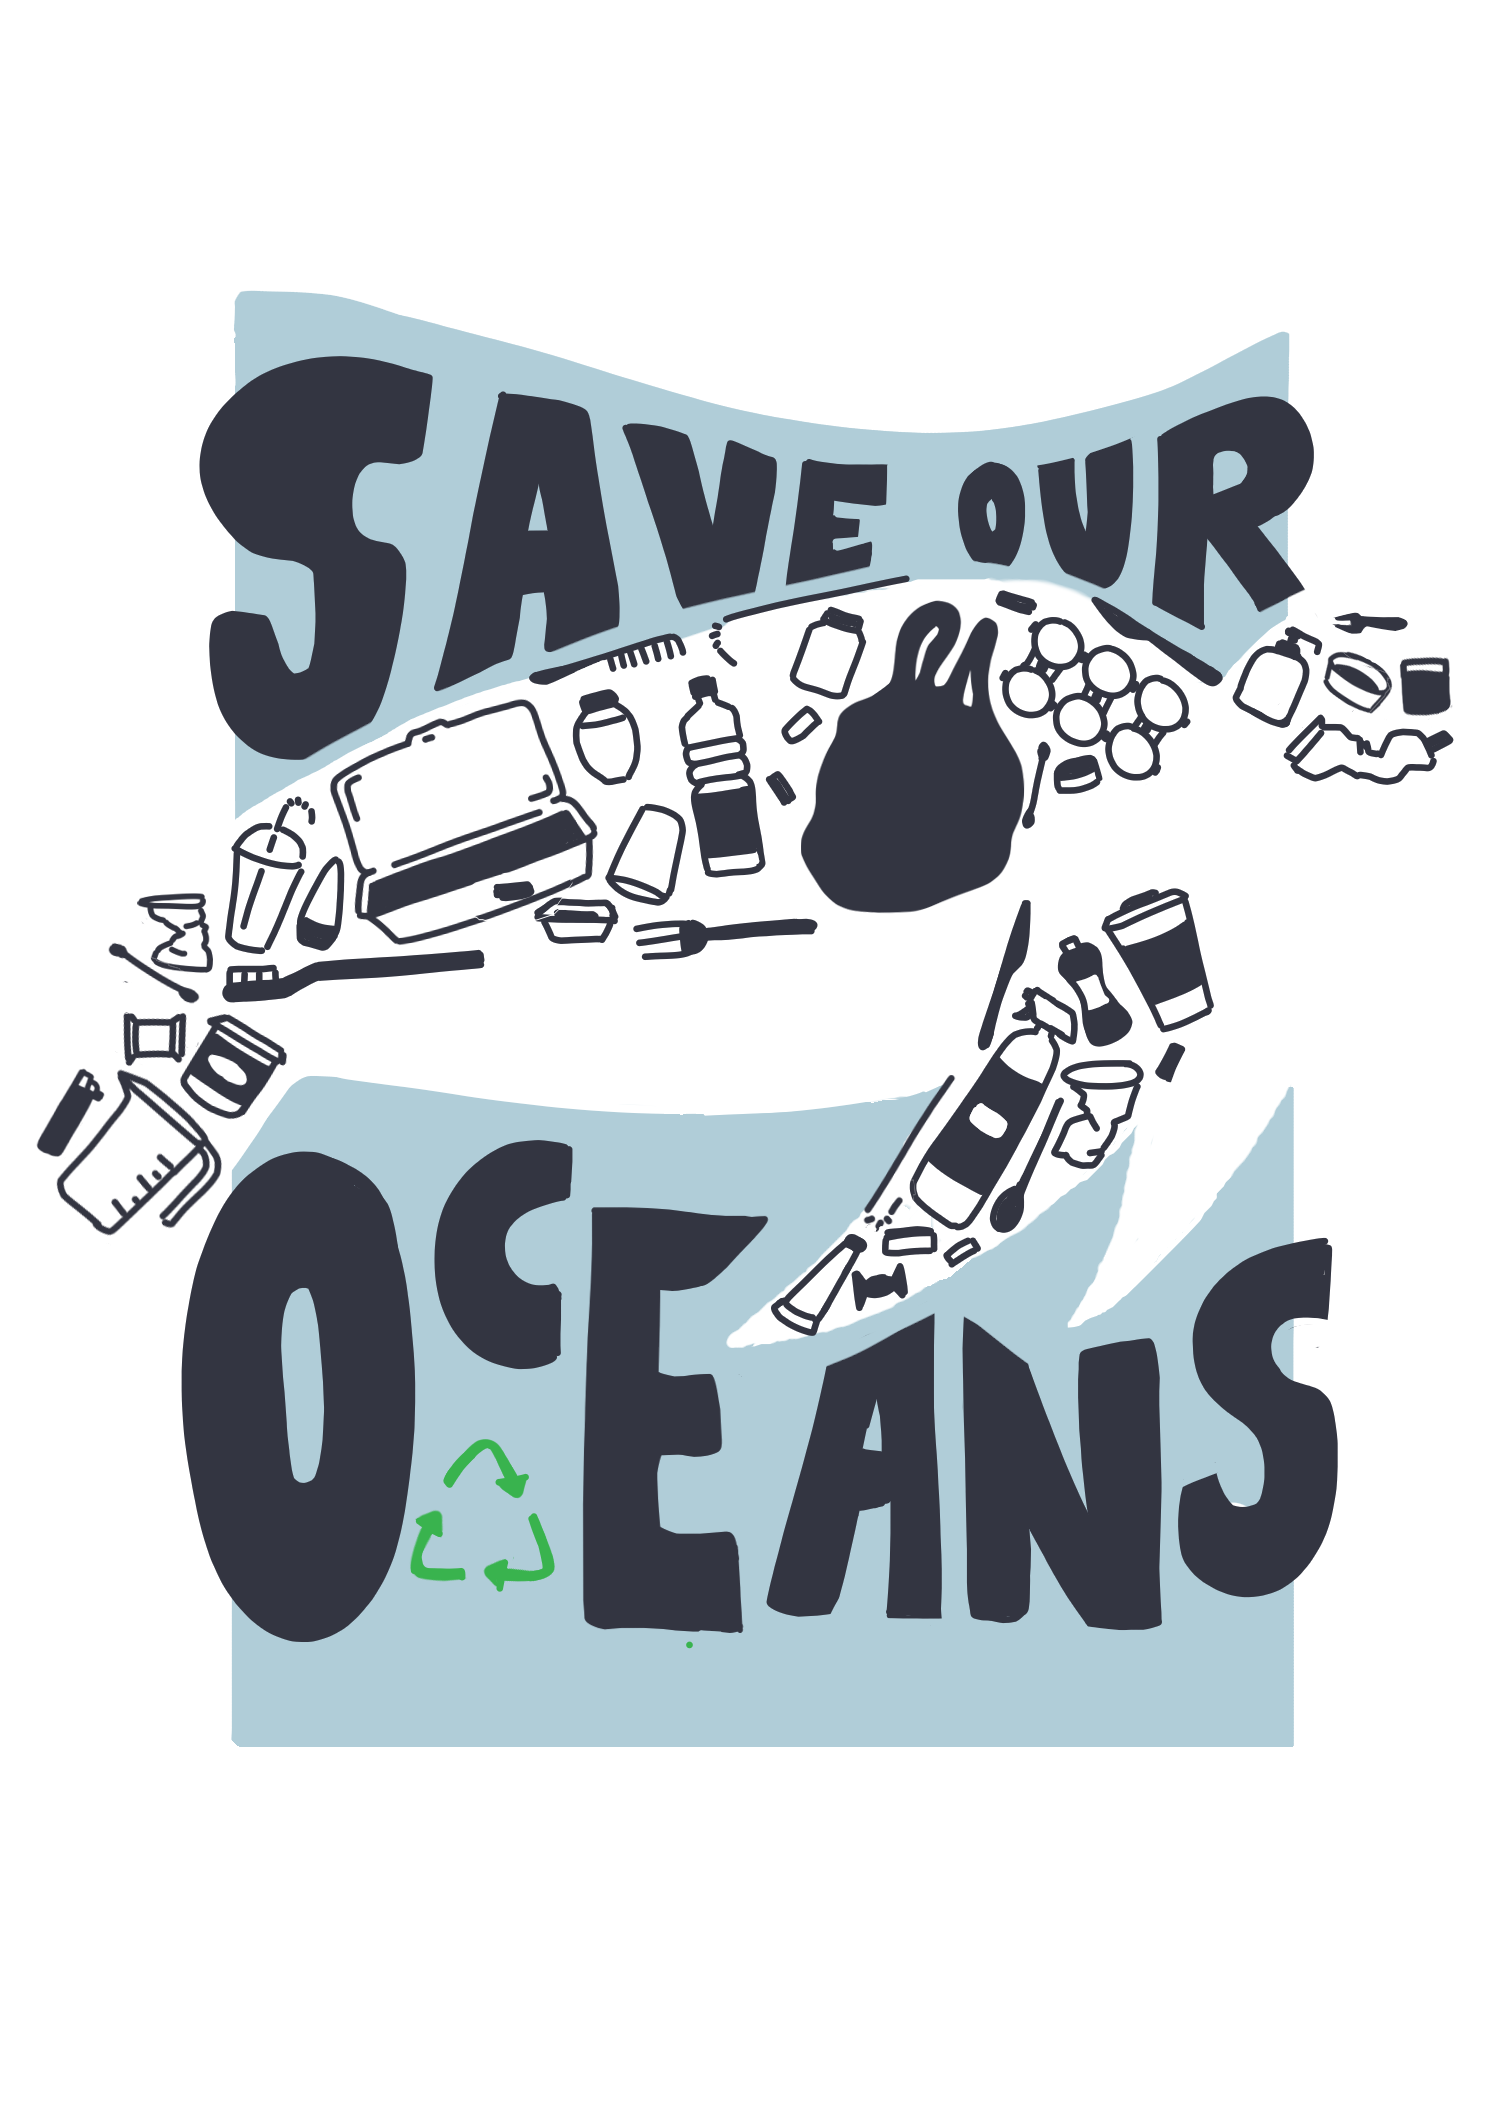 Child’s drawing featuring the slogan ‘Save our oceans’ and a turtle outline in the middle with plastic pollution items such as cotton buds, cups, bottles and plastic bags inside the turtle.